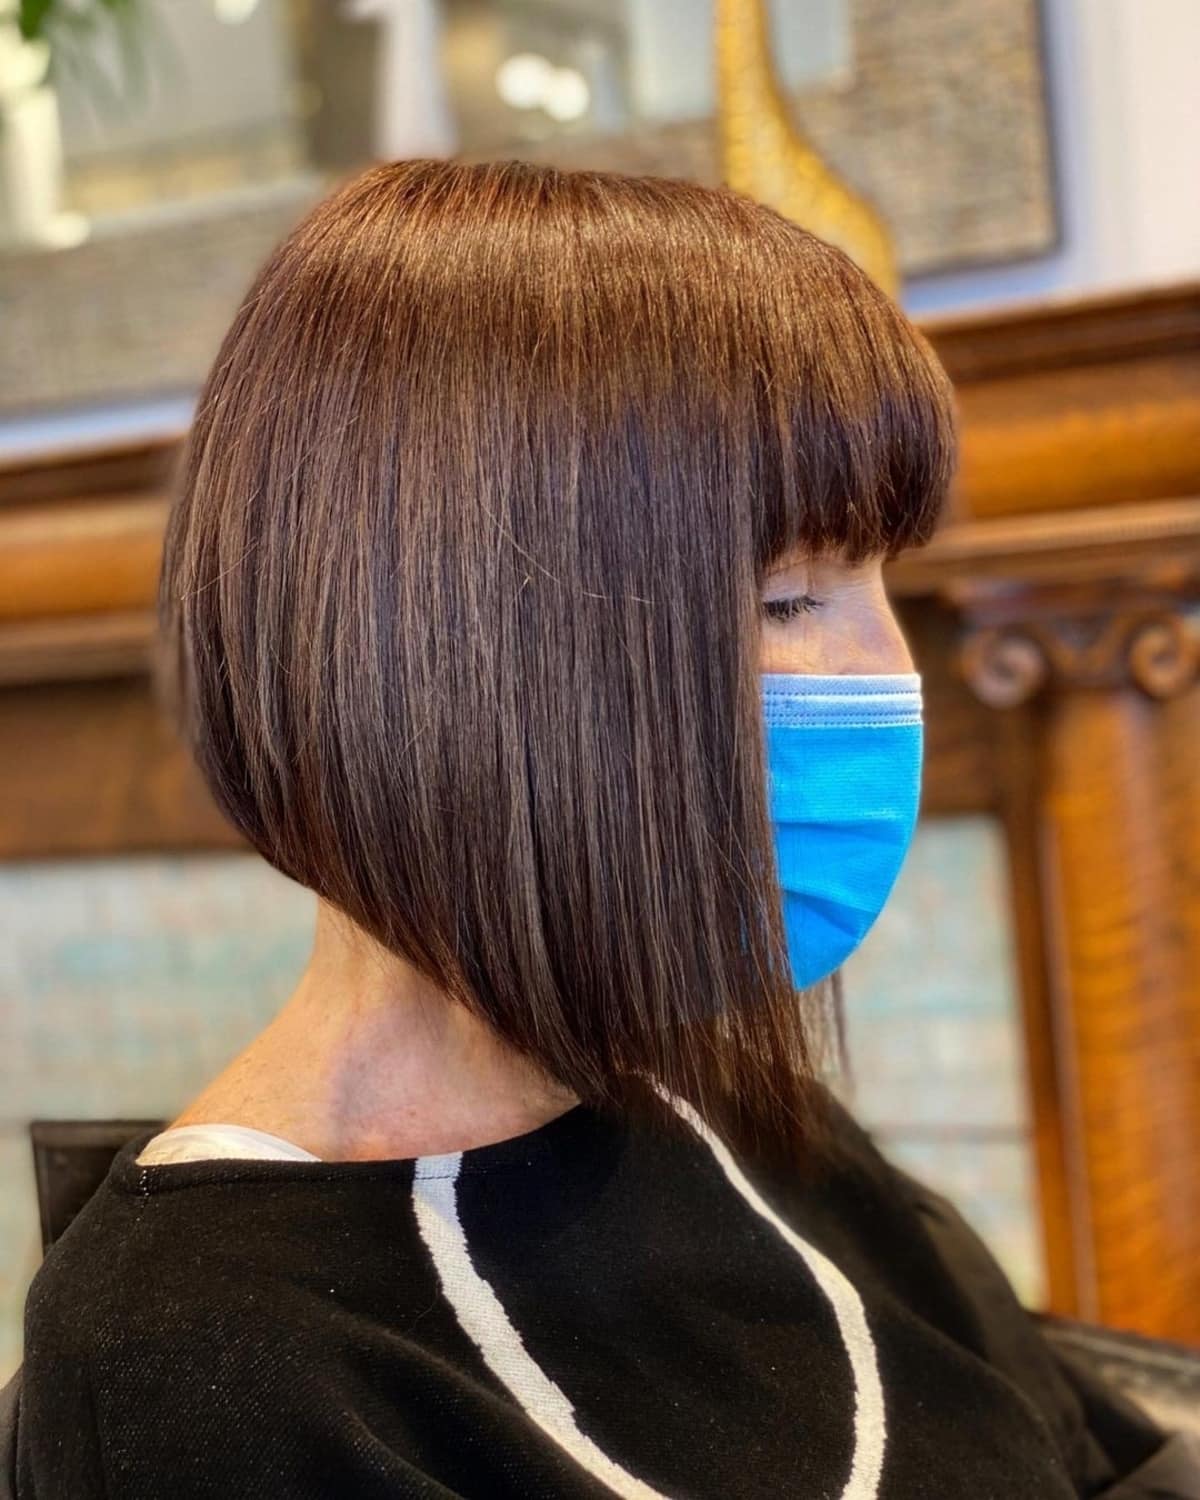 23 Best Angled Bob with Bangs Hairstyles You Gotta See